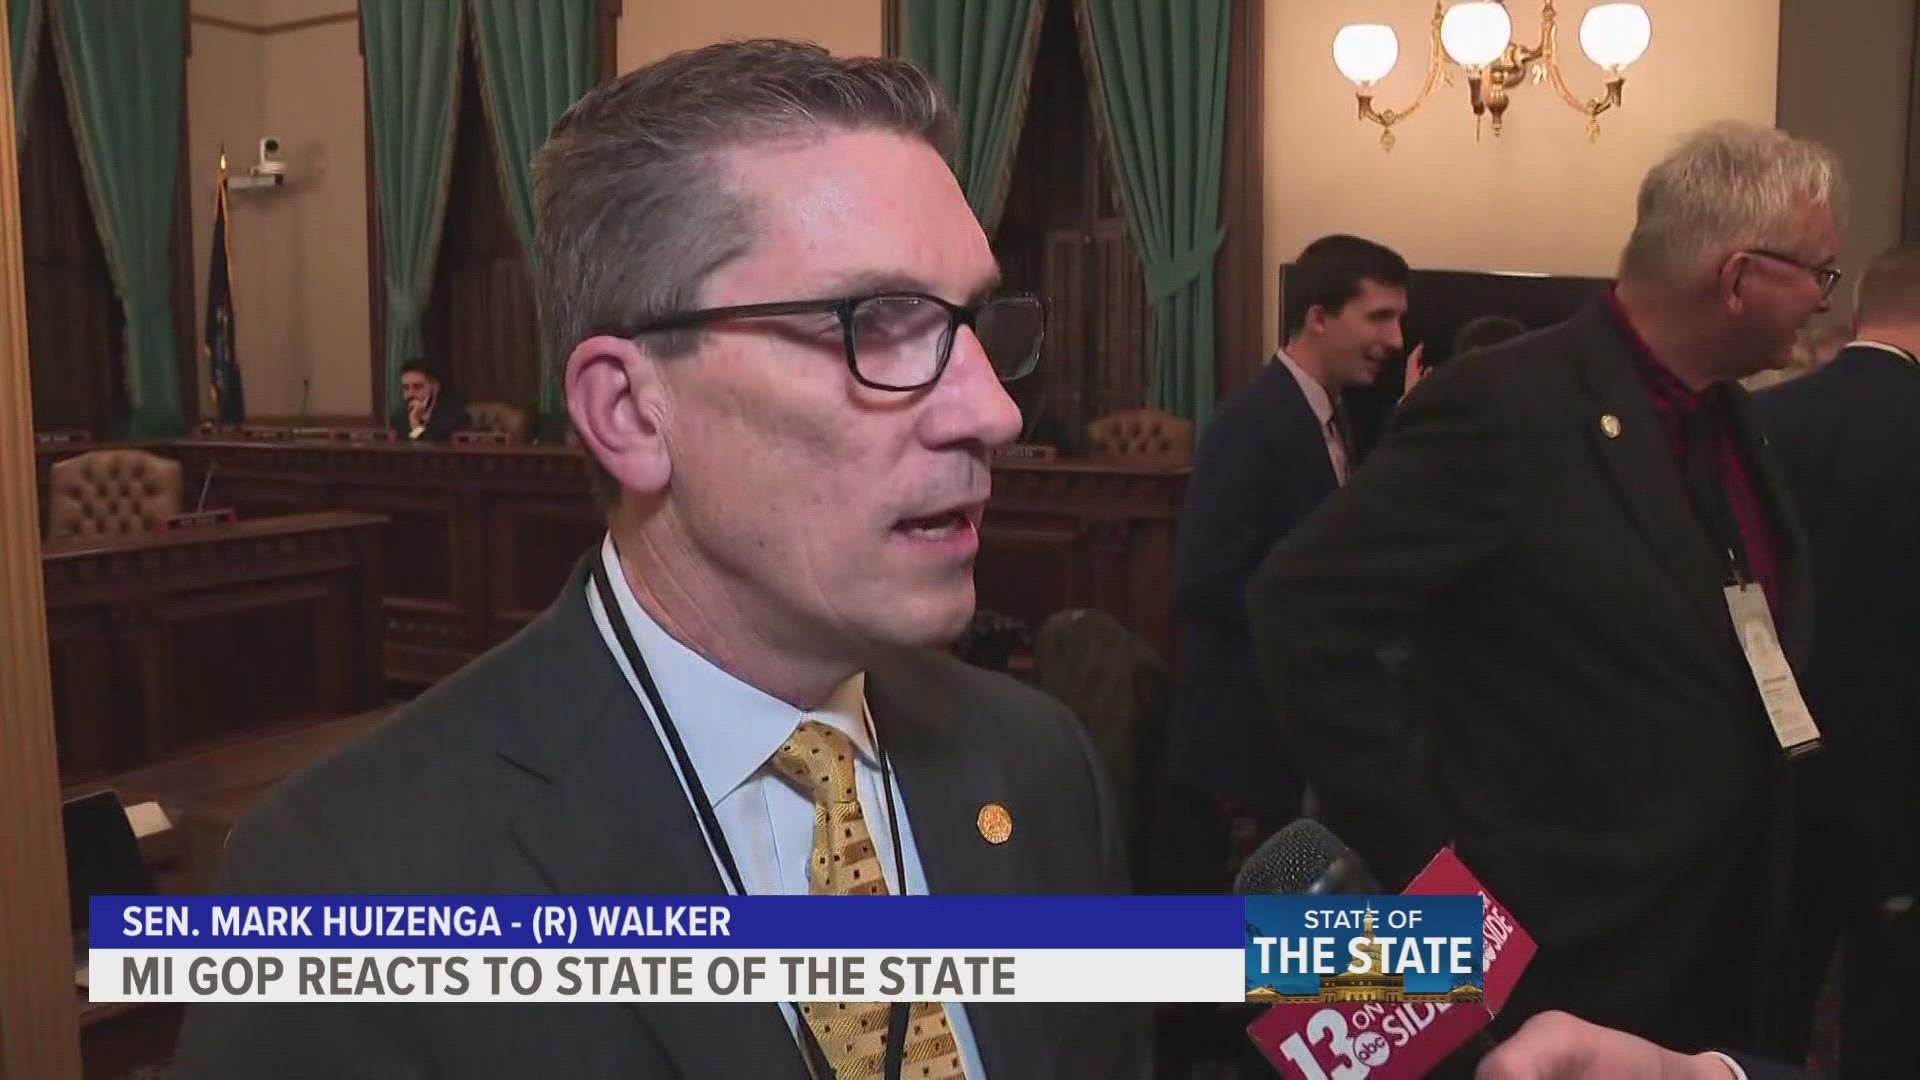 Members of the Michigan Republican Party are responding after Whitmer delivered her fifth State of the State address Wednesday evening.